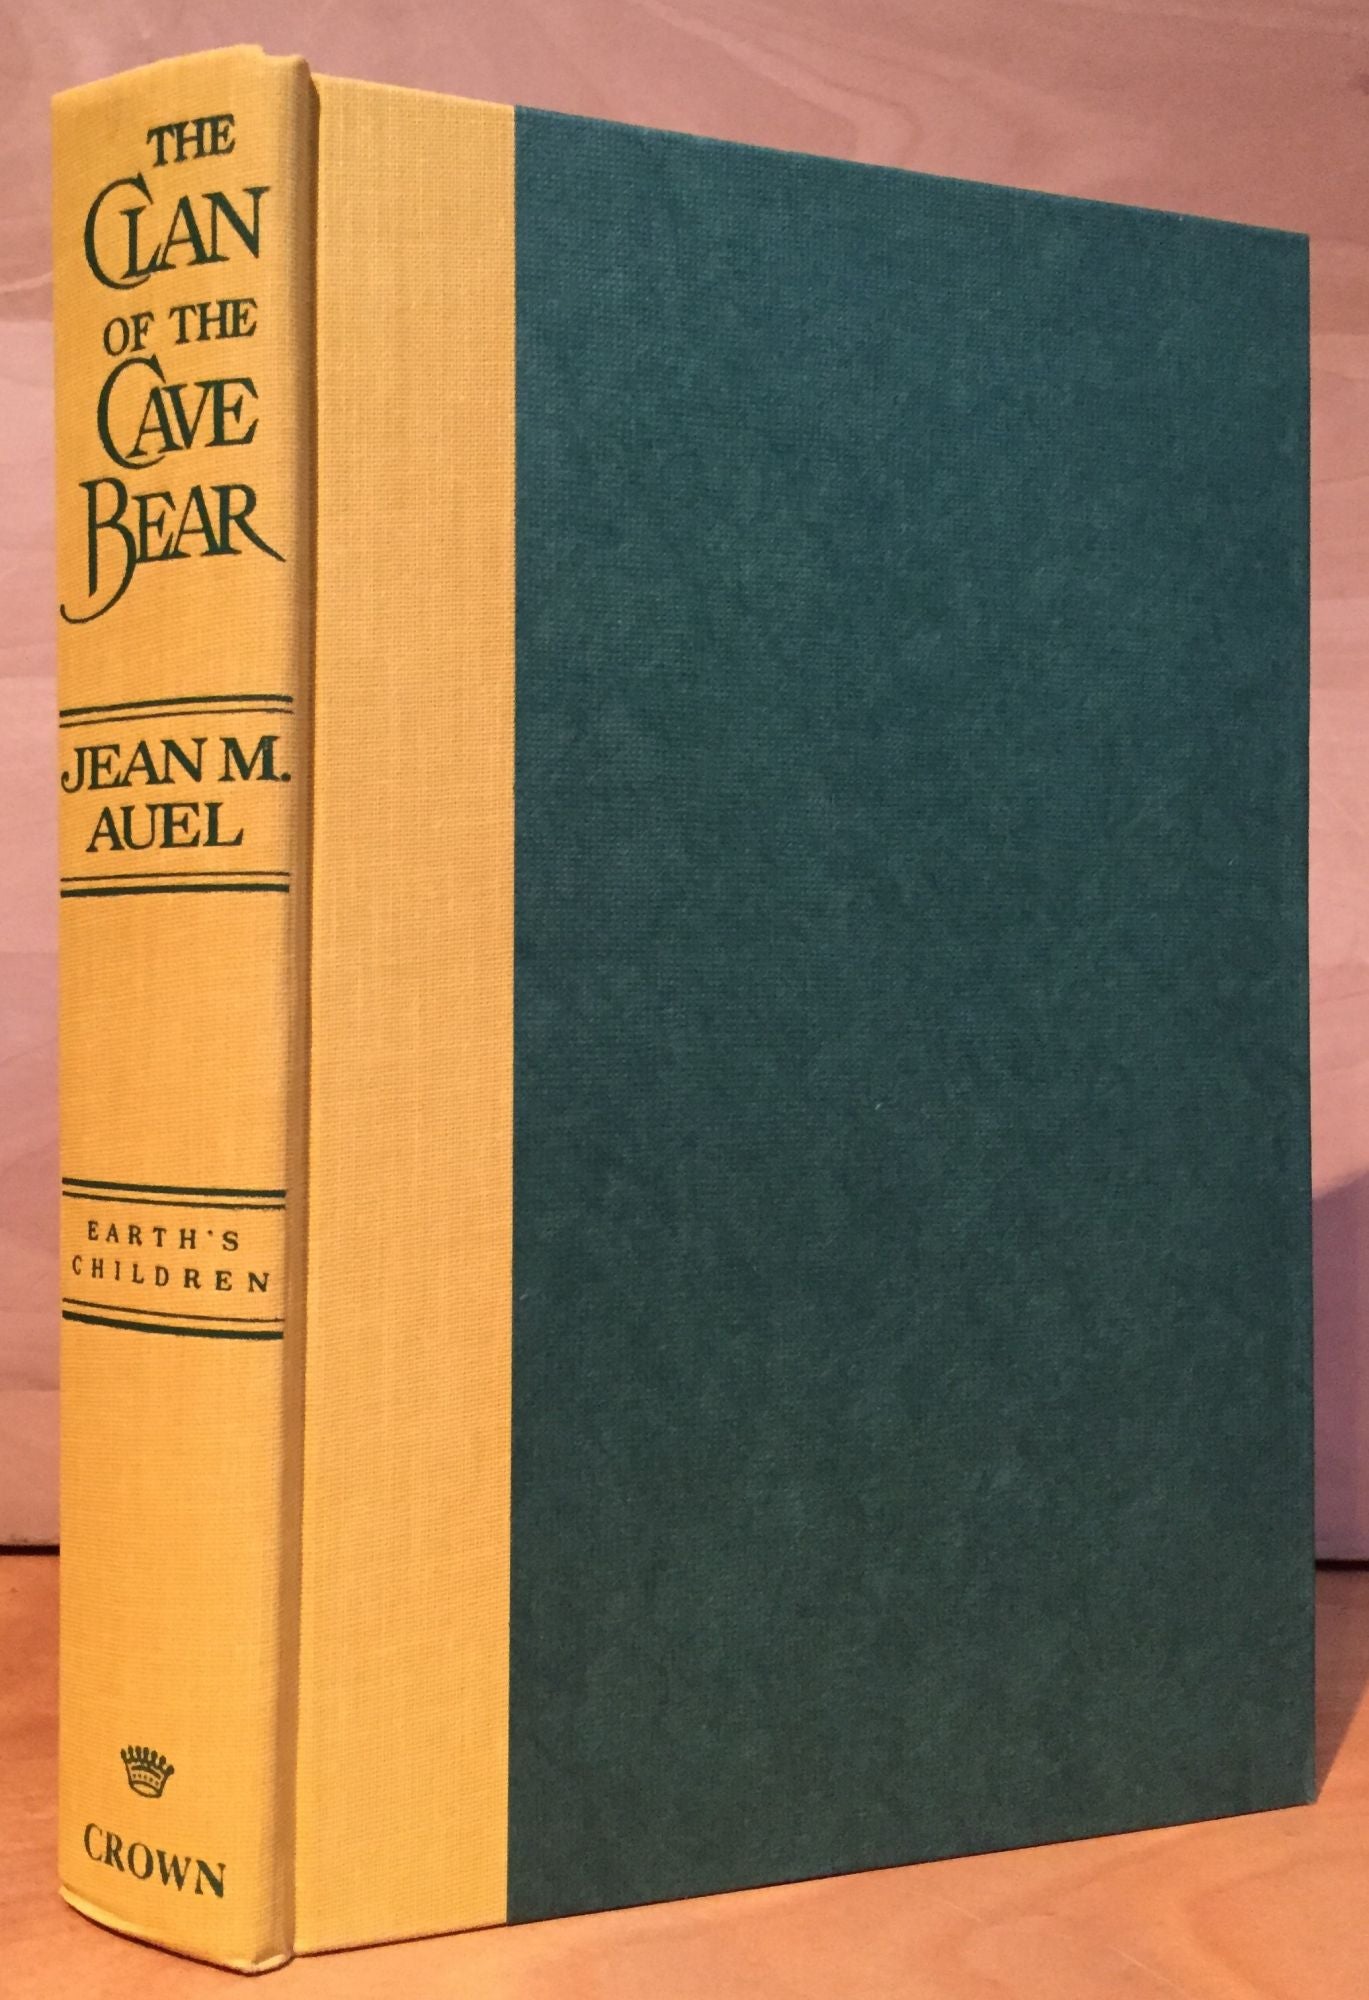 clan of the cave bear book